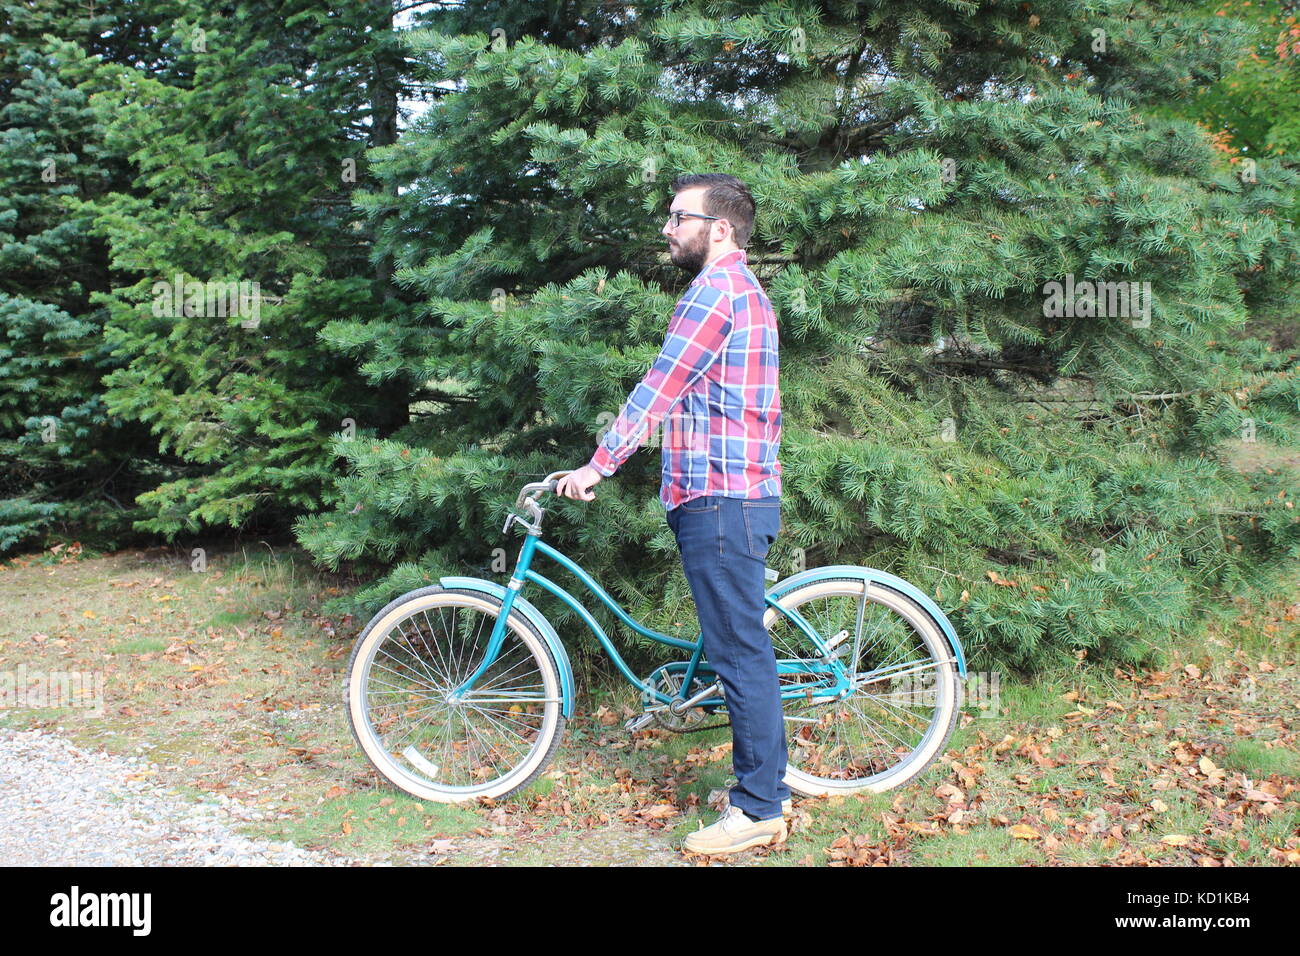 A man and model wearing a flannel plaid shirt with blue jeans rides and poses with a vintage bike/bicycle in the country Stock Photo